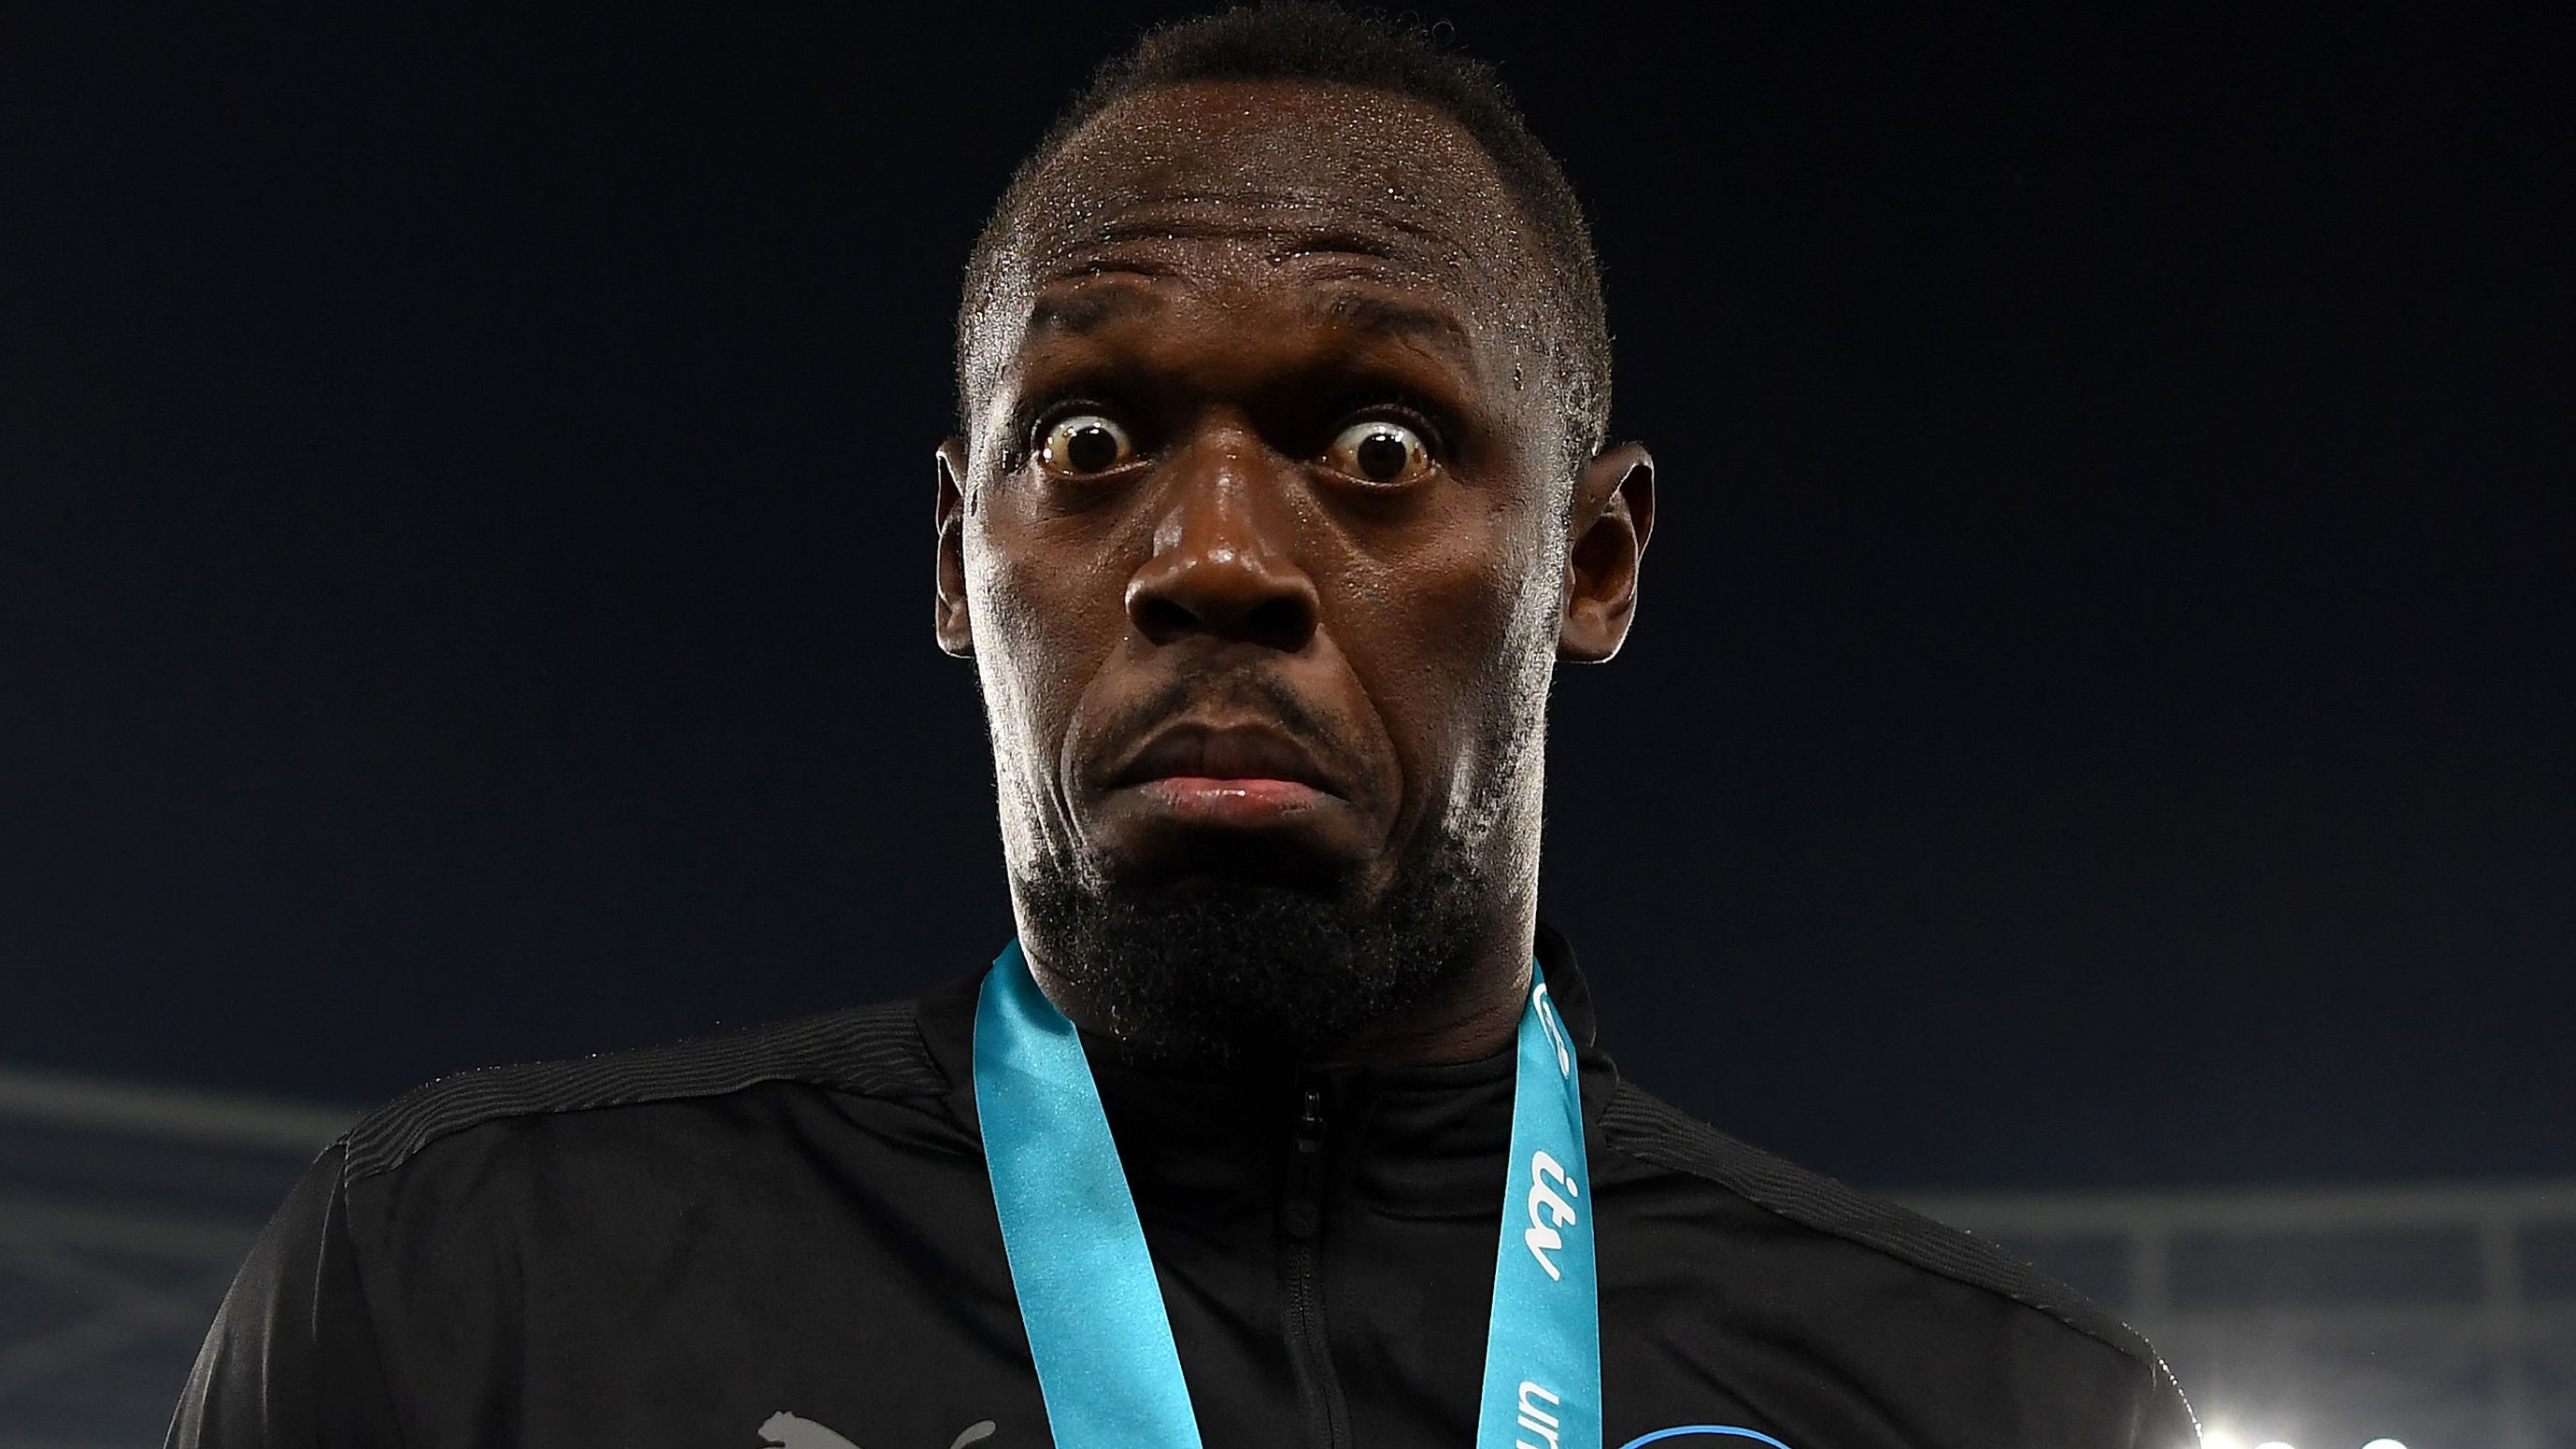 Usain Bolt fires business manager as $18 million in savings goes missing in fraud case